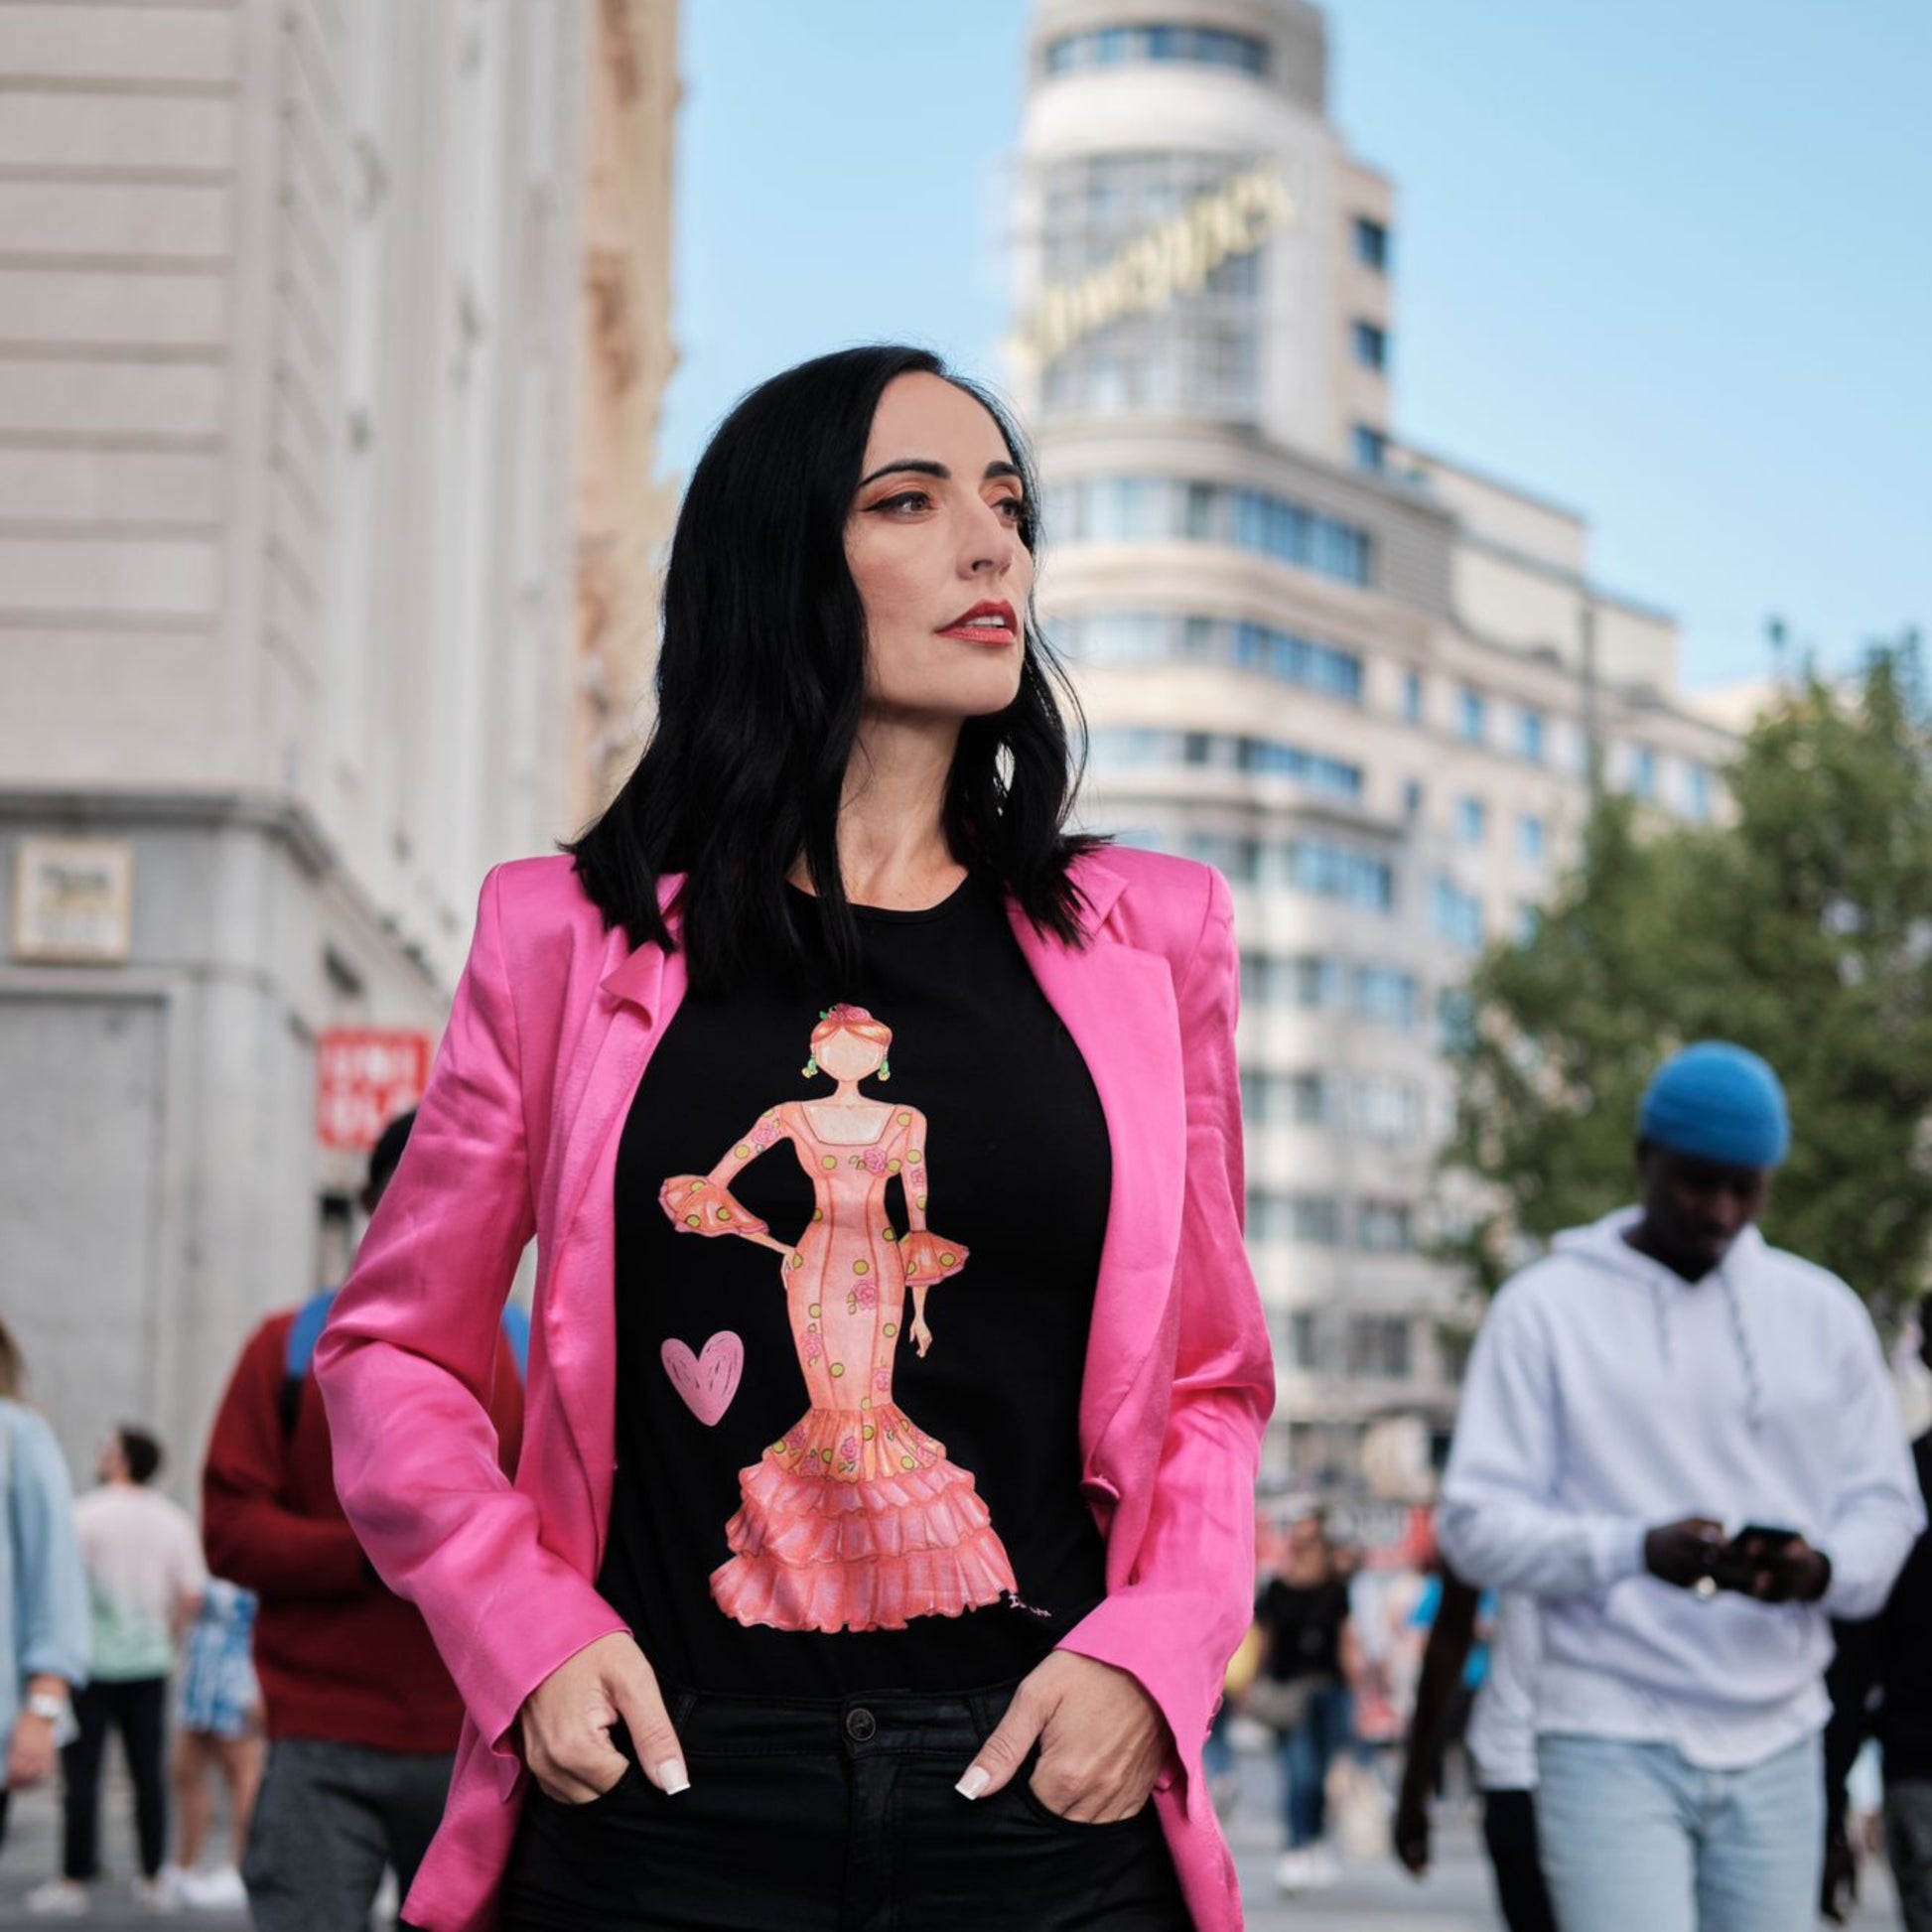 a woman in a black shirt and pink jacket